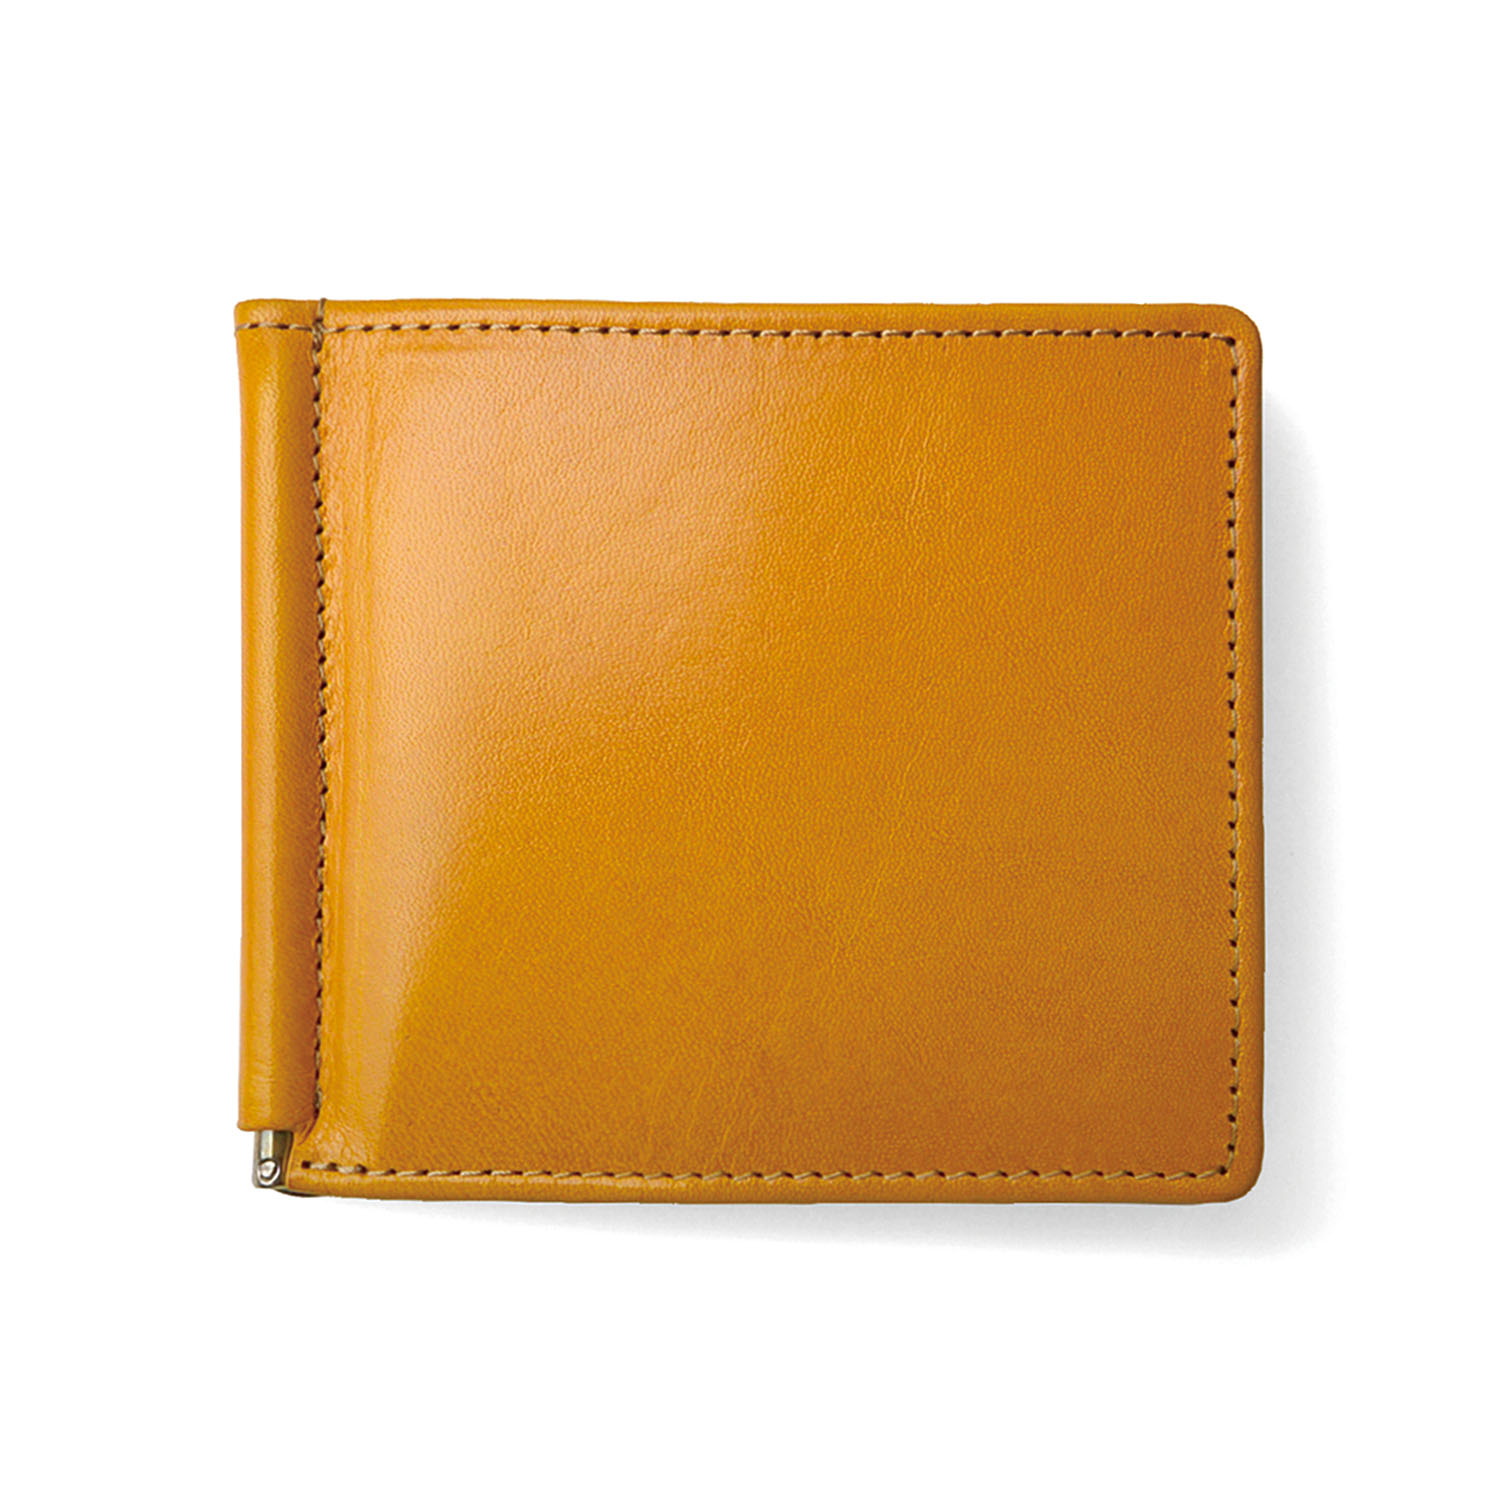 Re:Credo【SMALL LEATHER GOODS】マネークリップ 35-5077